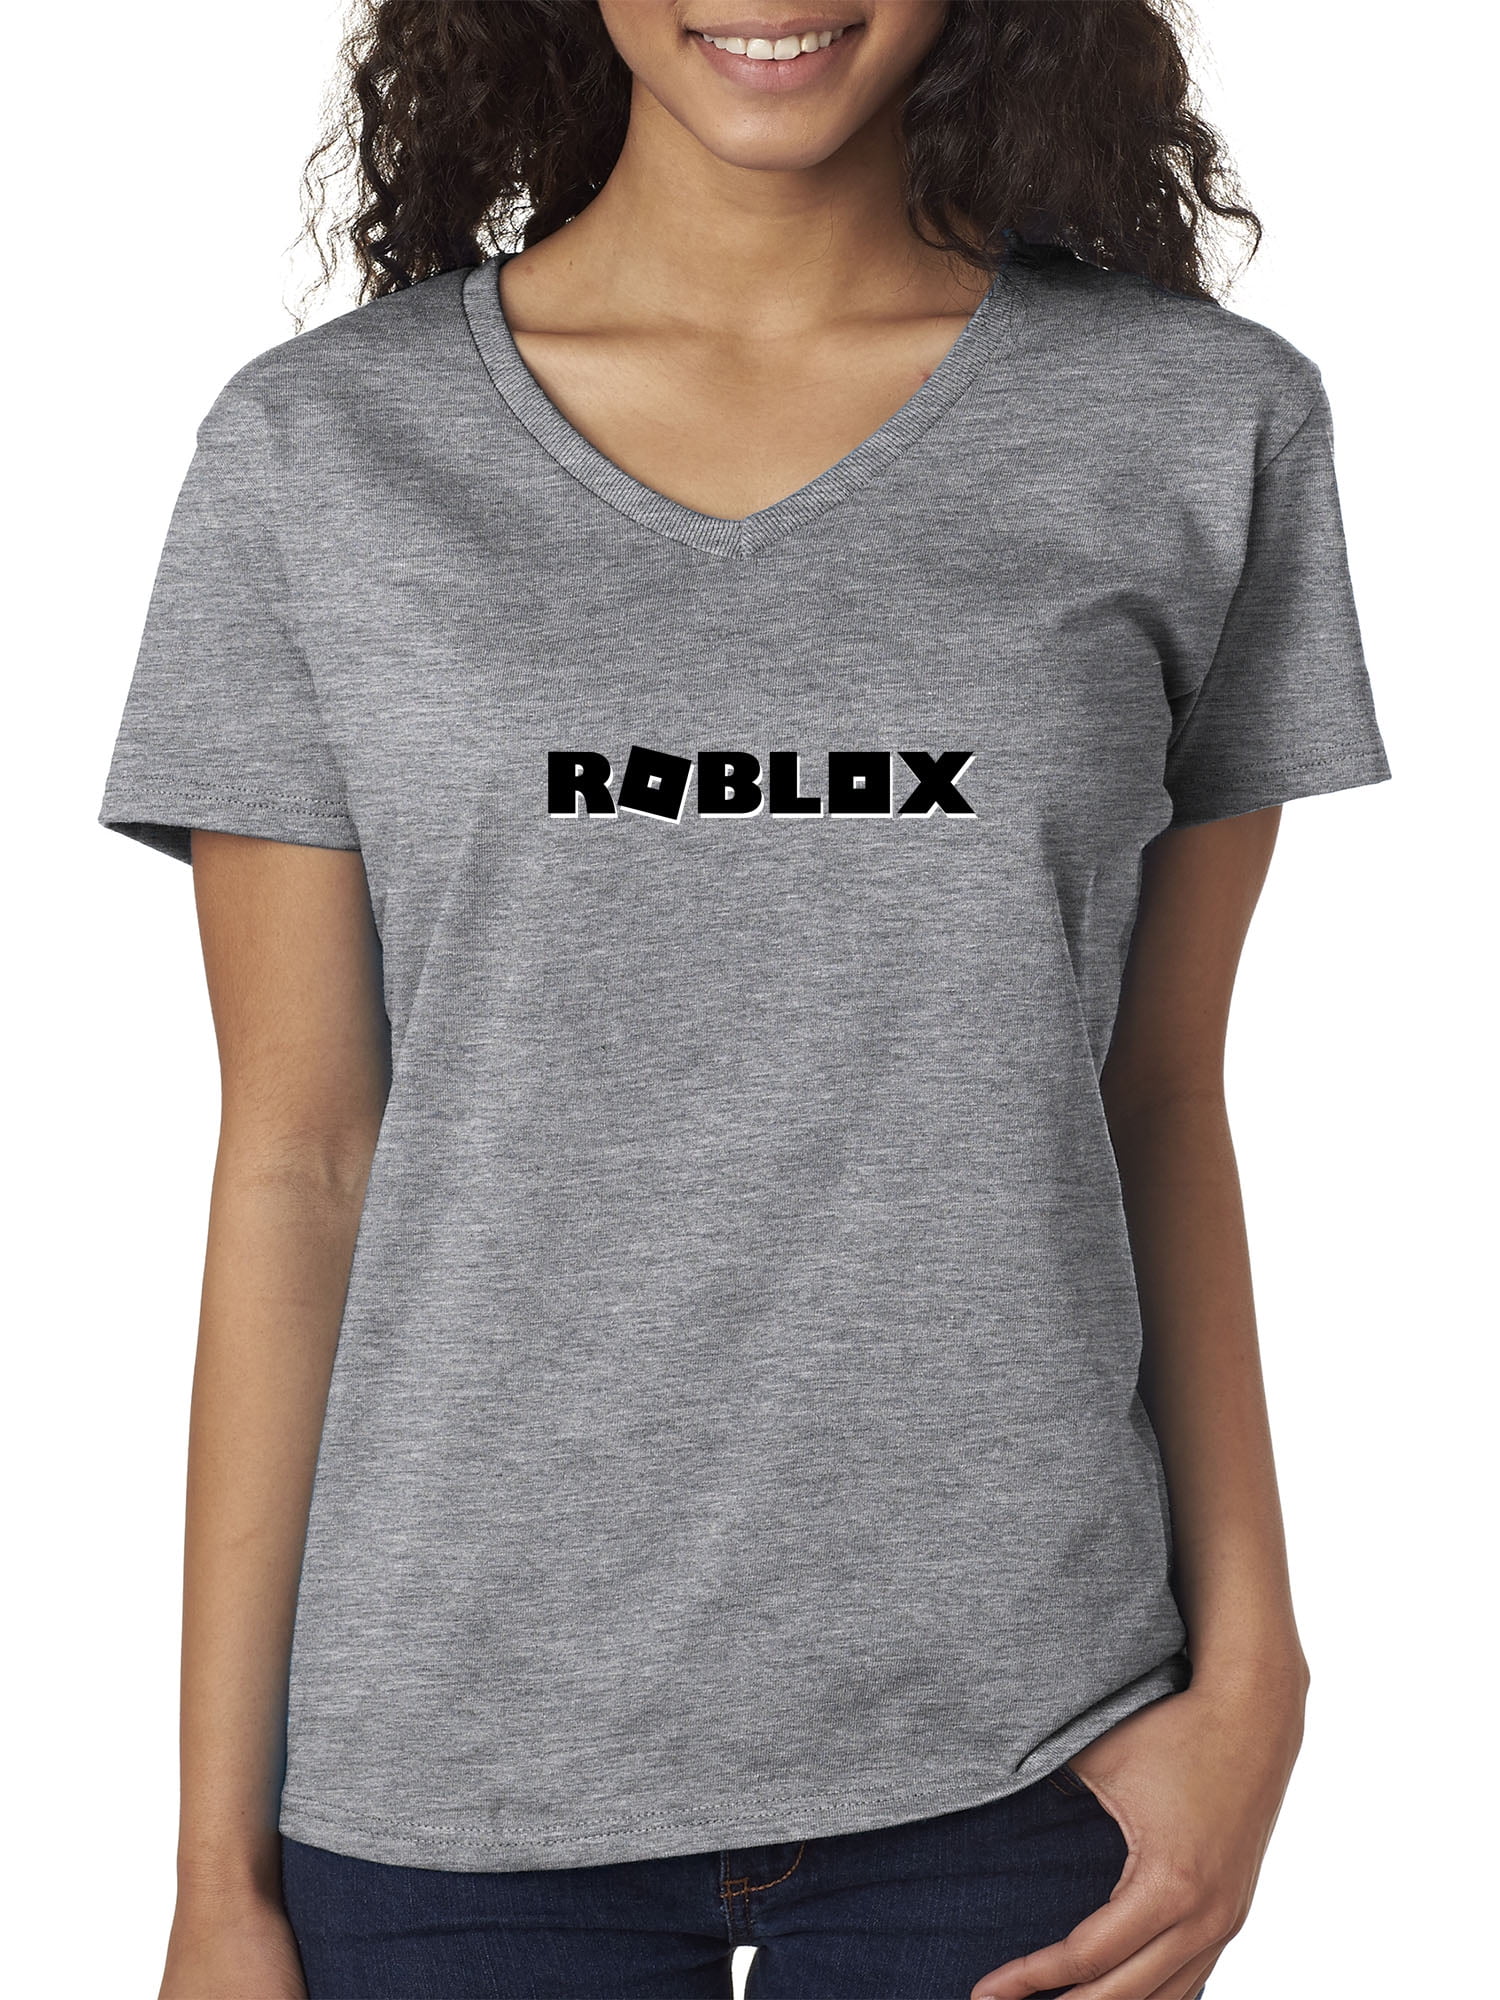 Trendy Usa Trendy Usa 1168 Women S V Neck T Shirt Roblox Block Logo Game Accent 2xl Heather Grey Walmart Com - pictures of roblox created shirts image